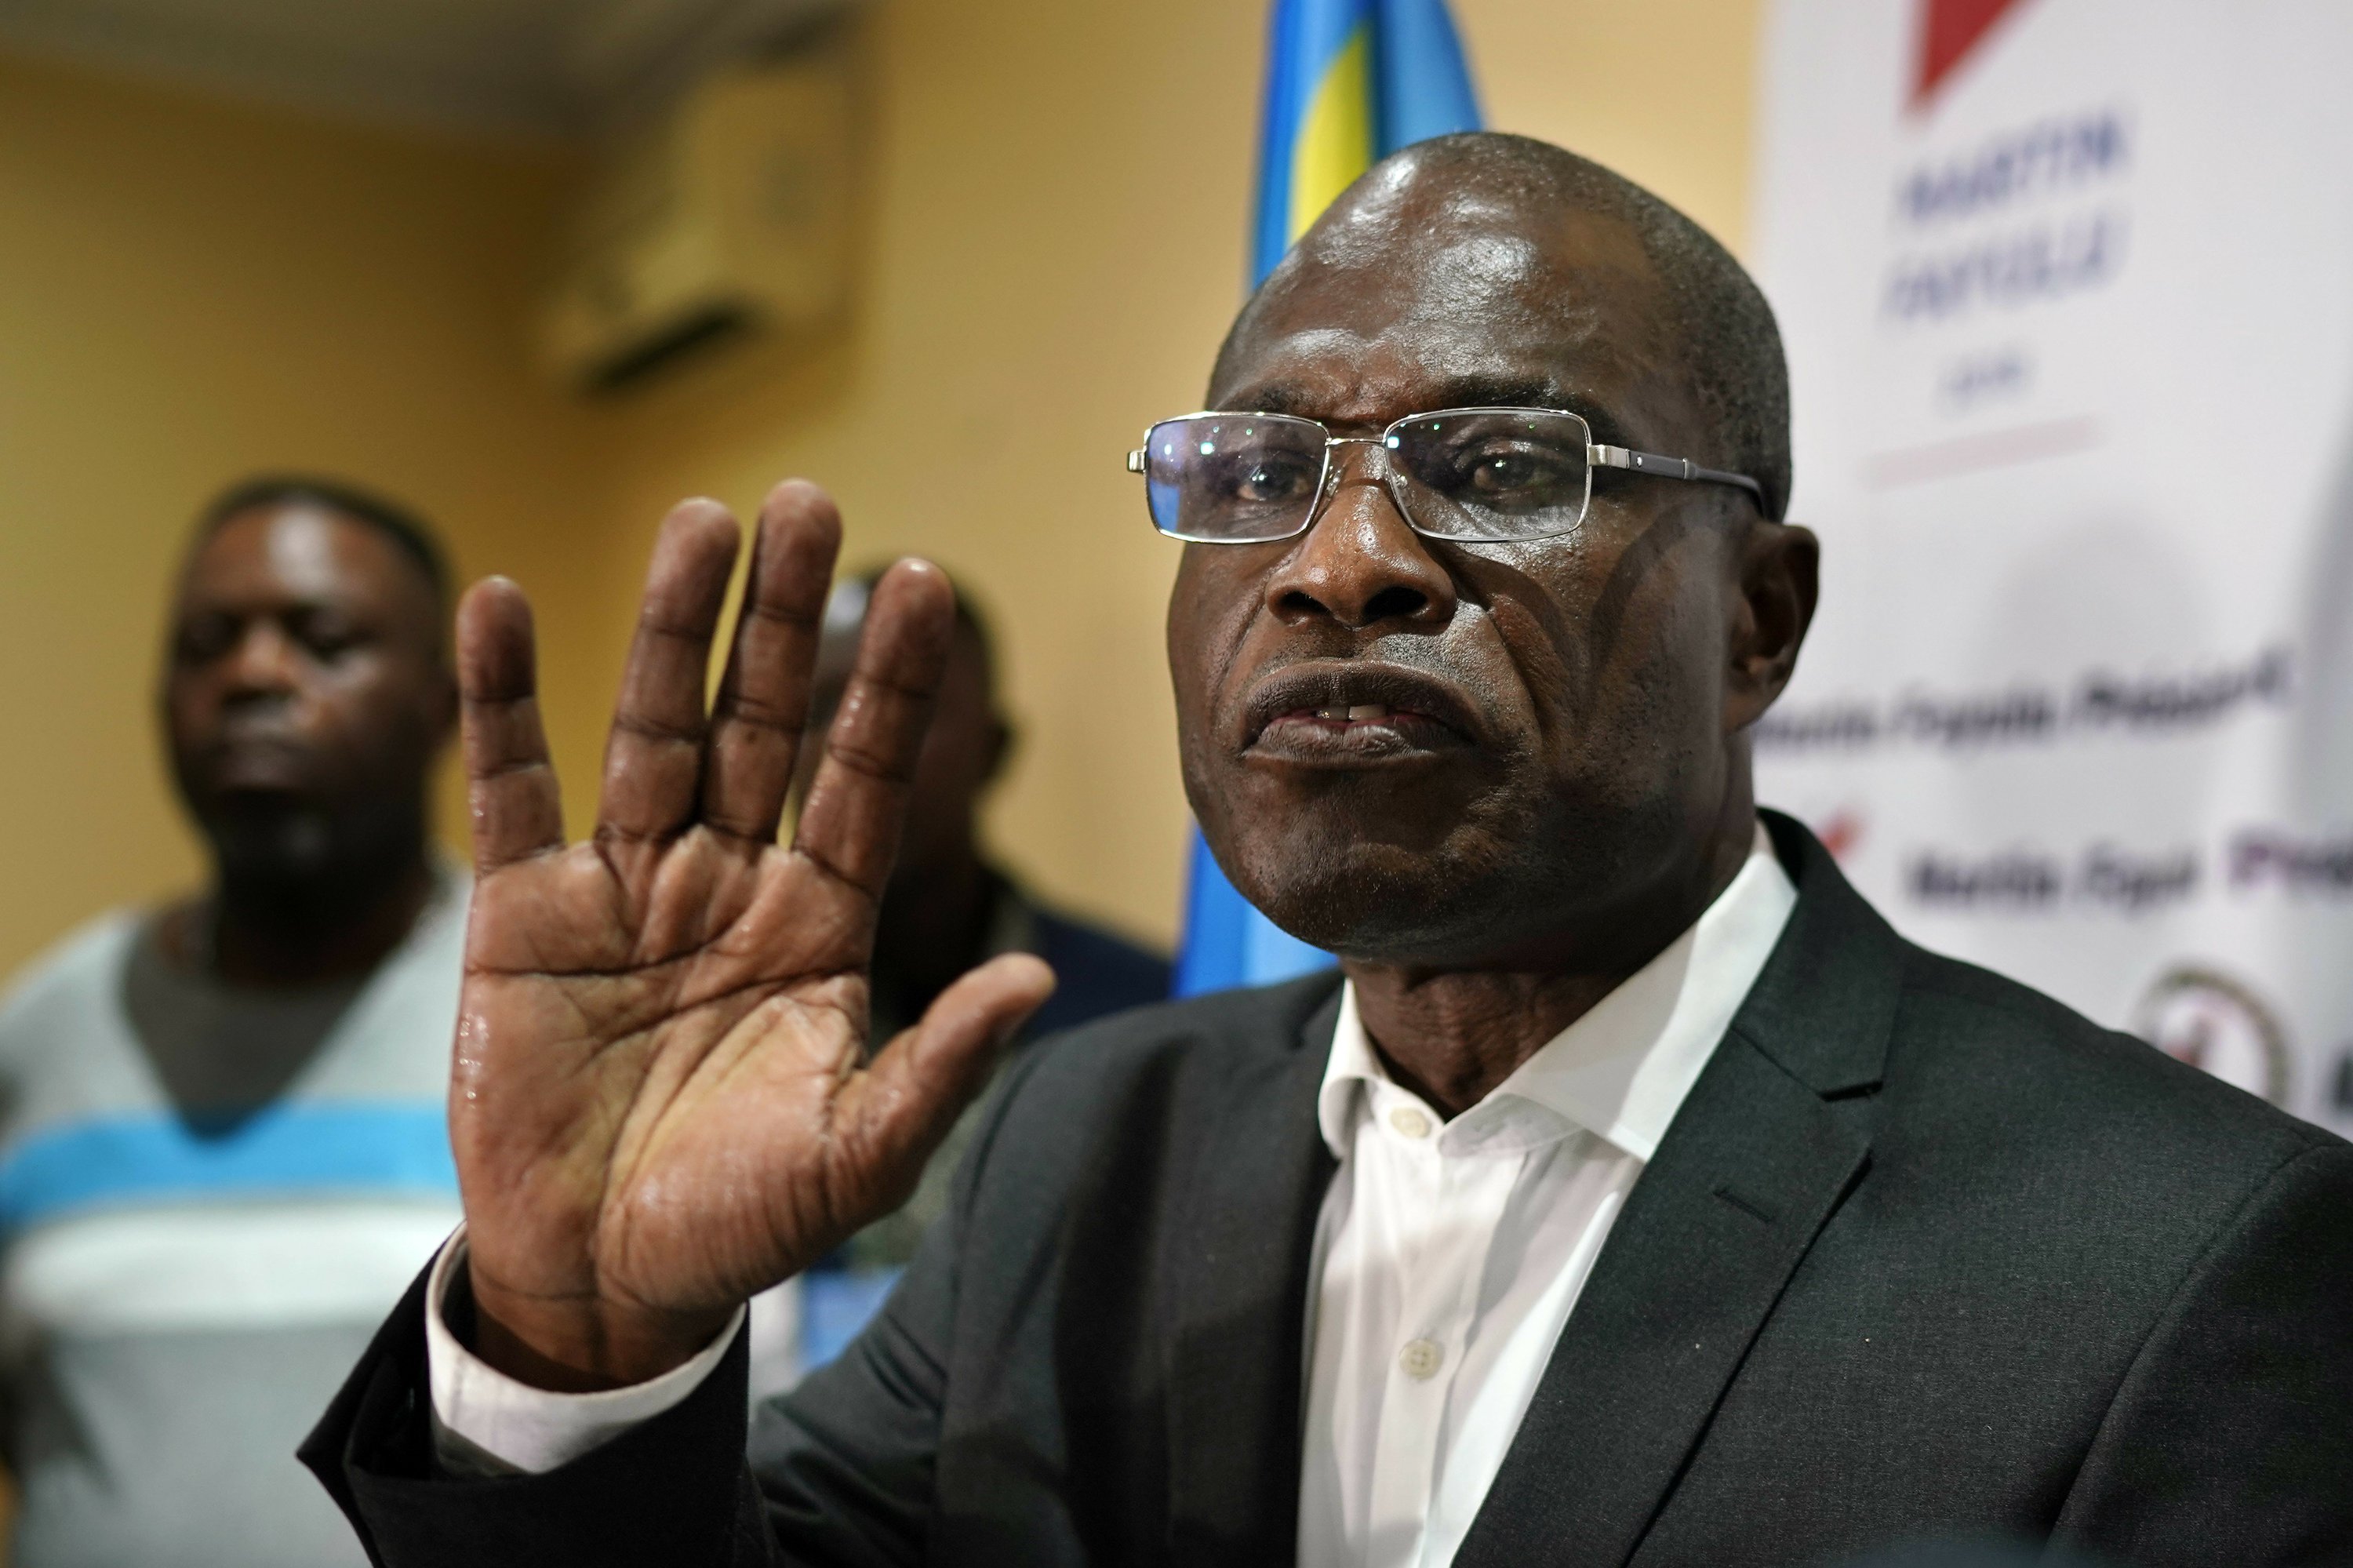 The Latest: Opposition candidate Fayulu denounces results